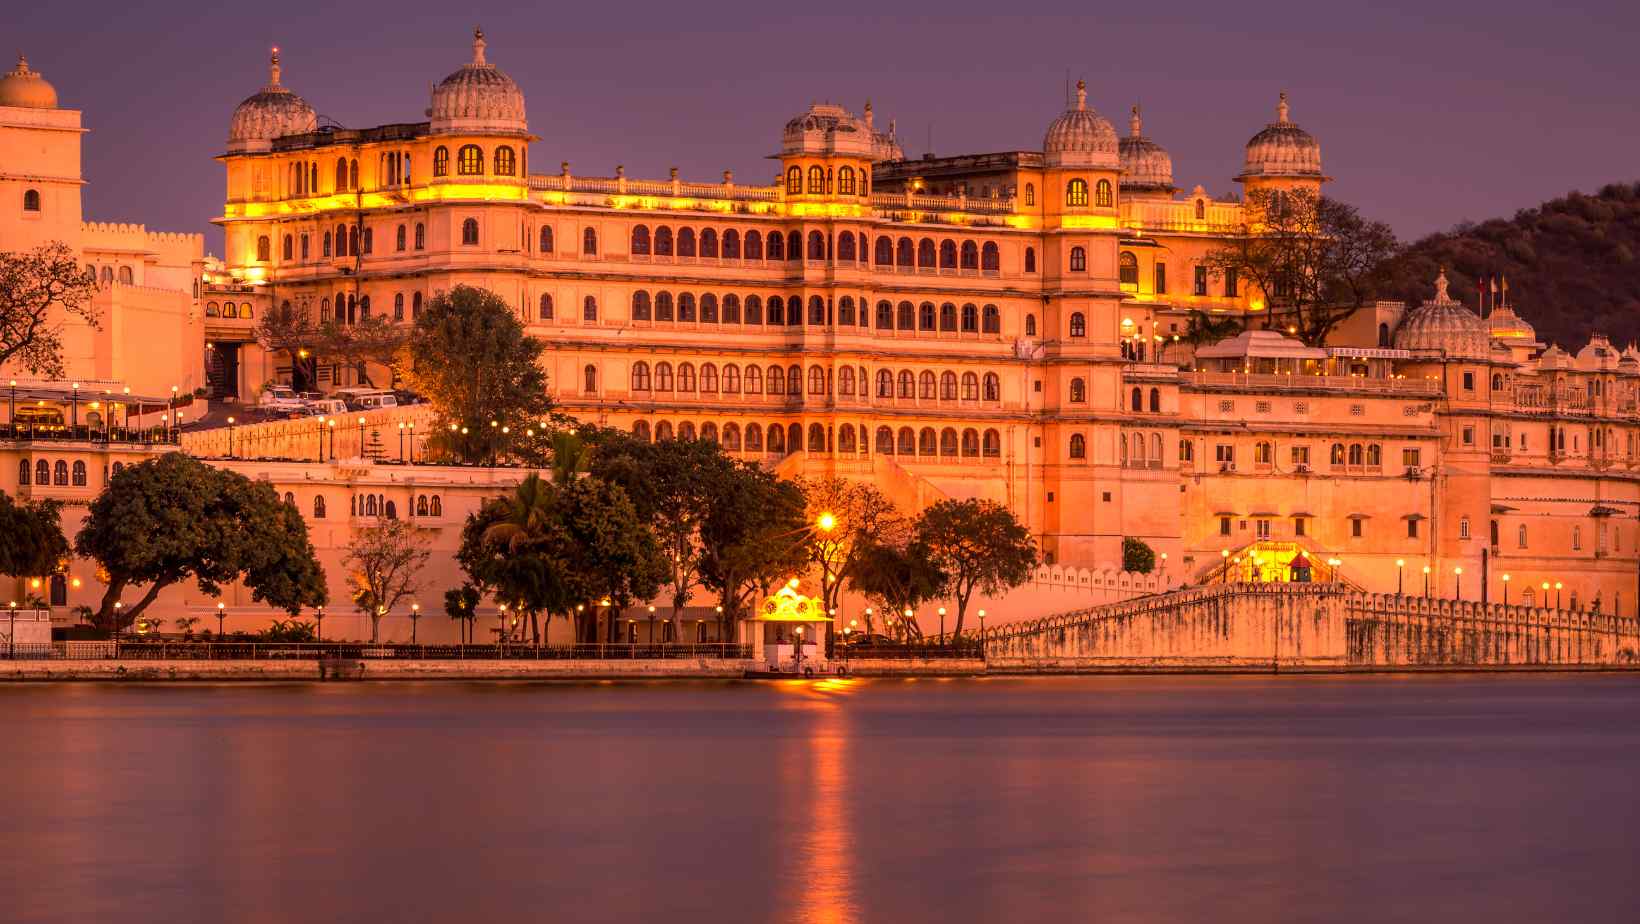 sightseeing in udaipur by car